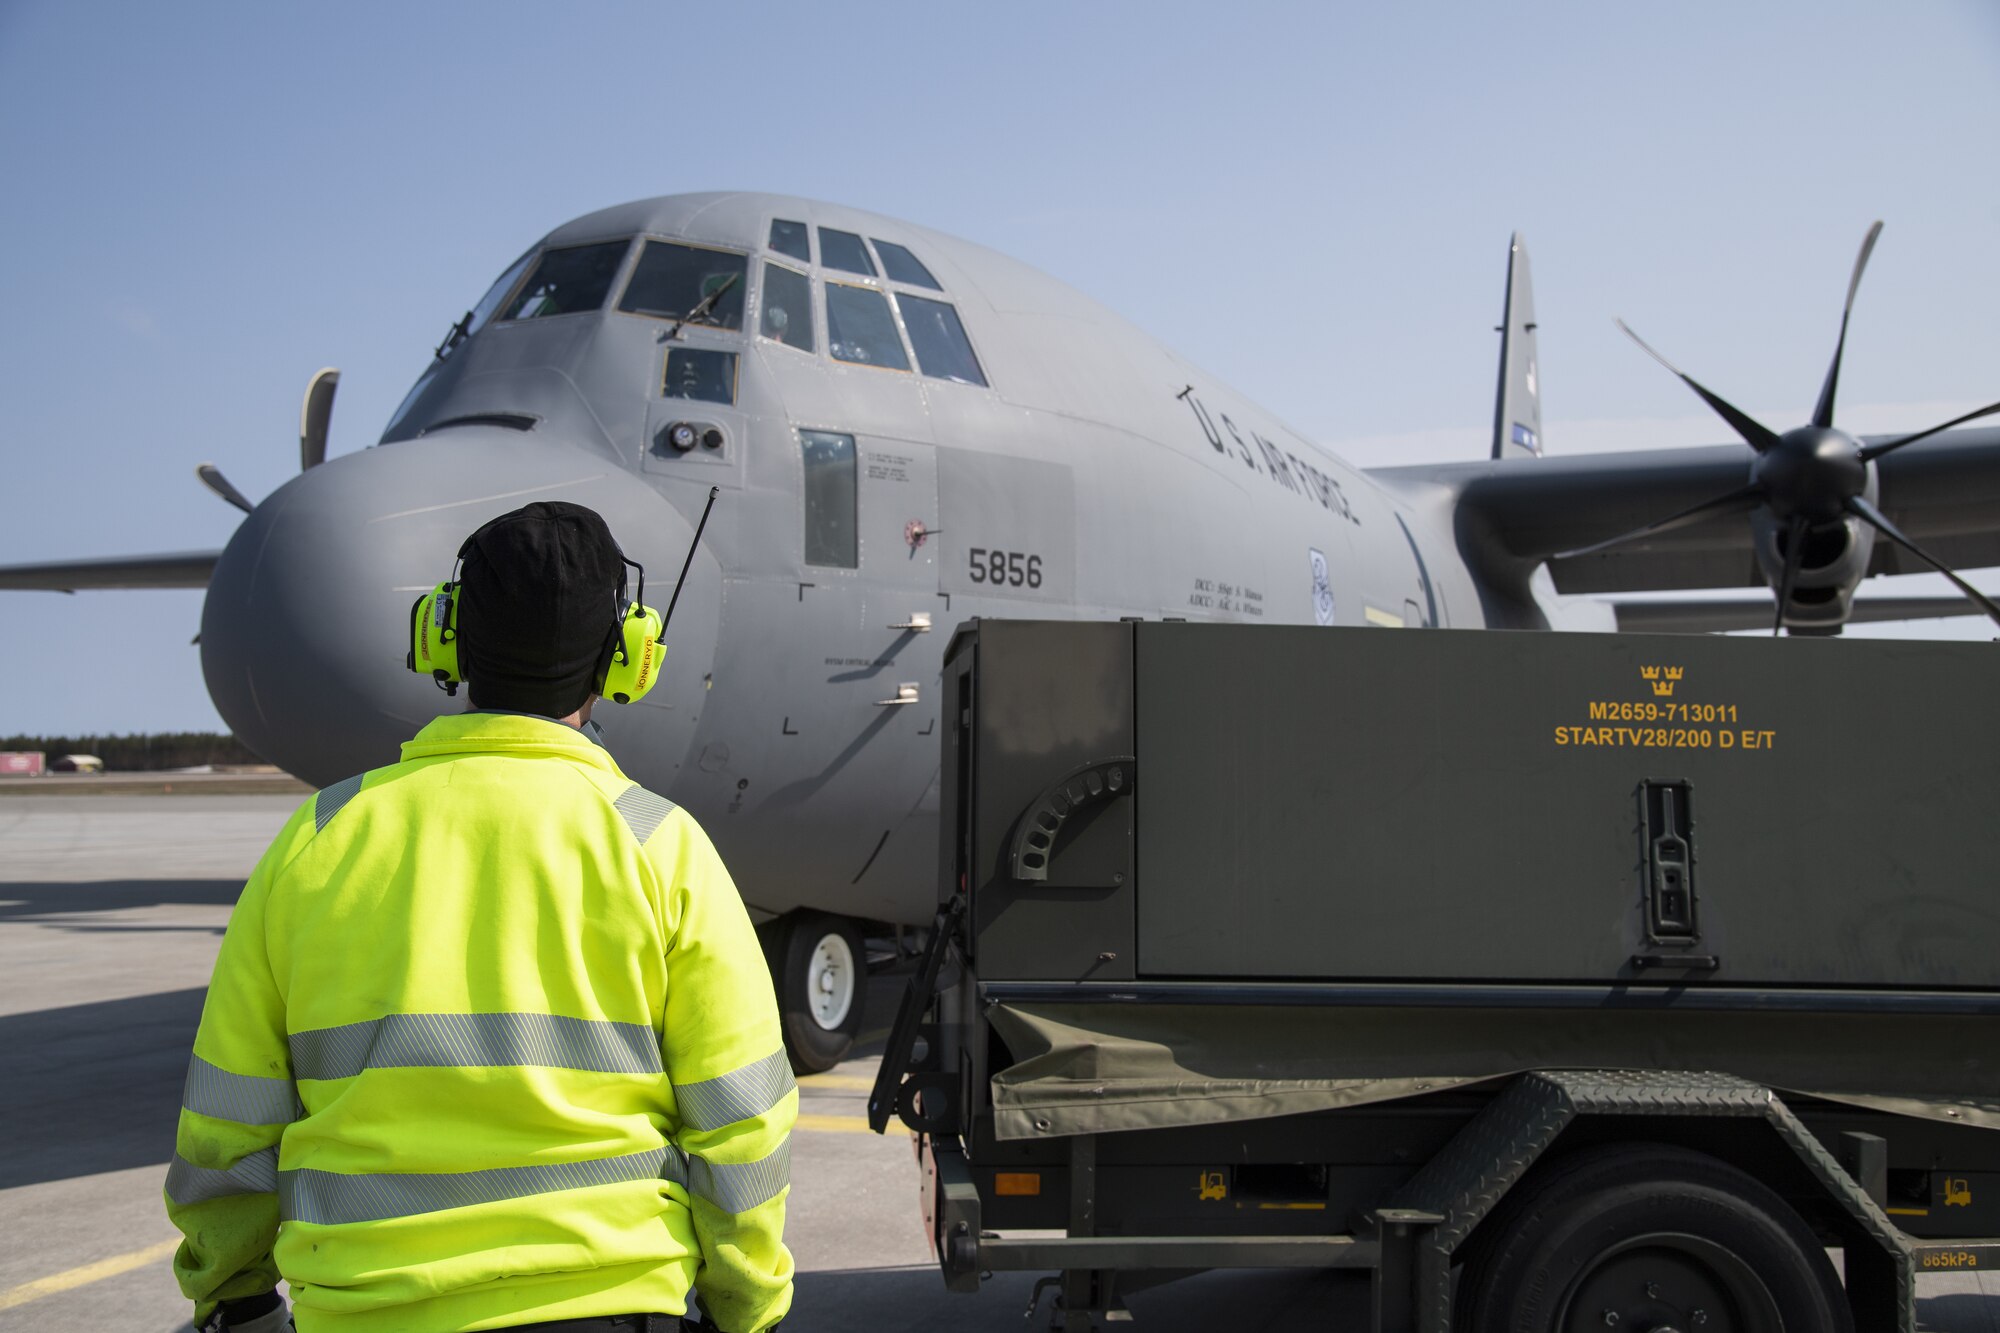 An employee at Kallax Air Base, Sweden, waits for a U.S. Air Force C-130 Hercules aircraft to unload cargo at Kallax AB, Sweden, May 14, 2021. The aircraft deployed from the 86th Airlift wing at Ramstein Air Base, Germany, in support of Arctic Challenge Exercise 2021. (U.S. Air Force photo by Senior Airman Ali Stewart)